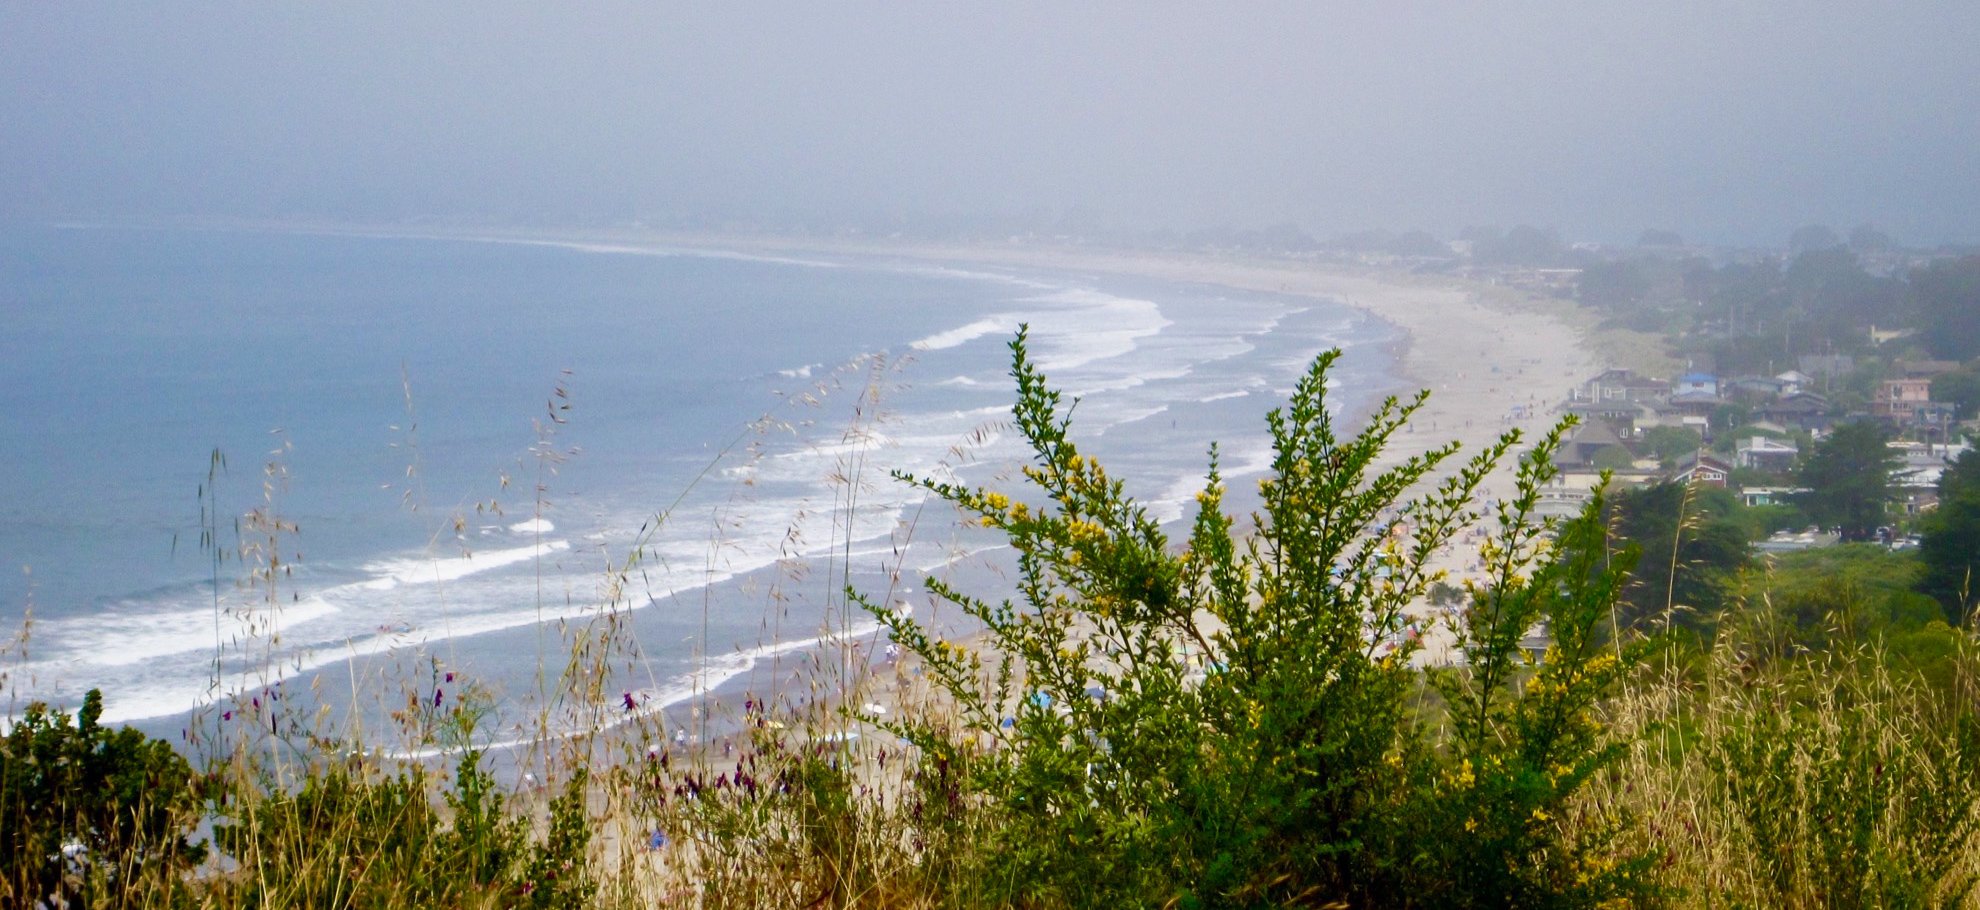 How To Spend A Perfect Day In Stinson Beach